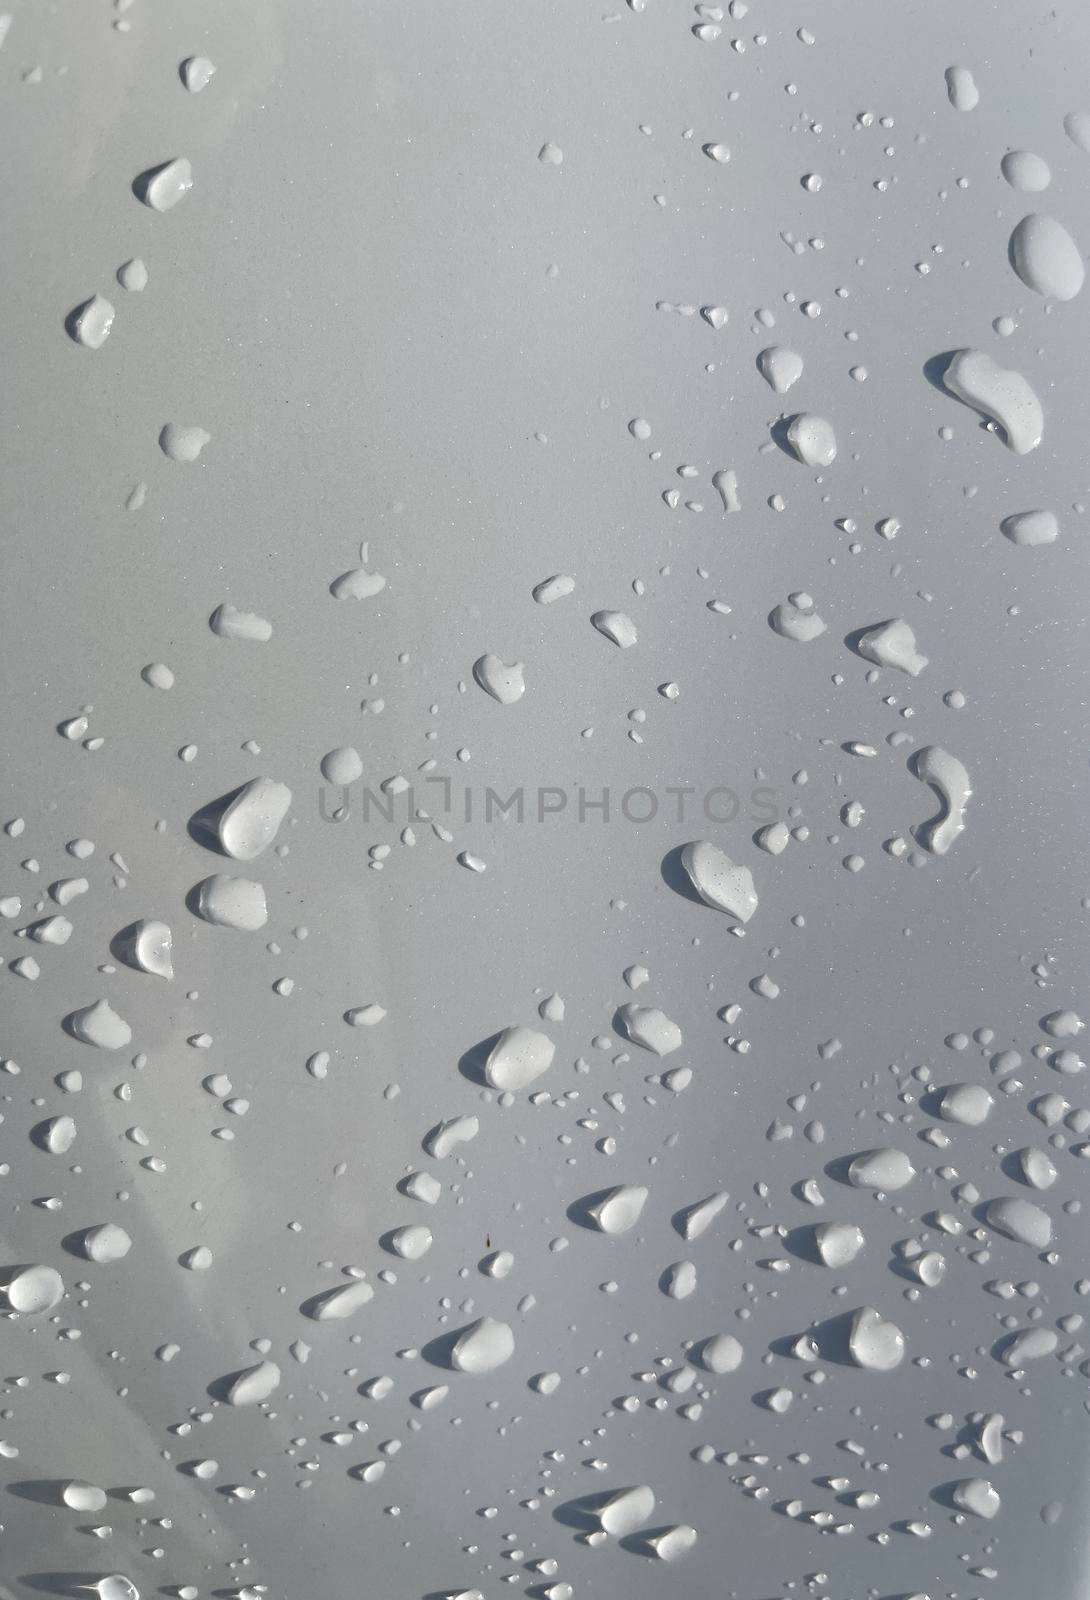 Water droplets perspective through white color surface good for multimedia content backgrounds, fresh dew